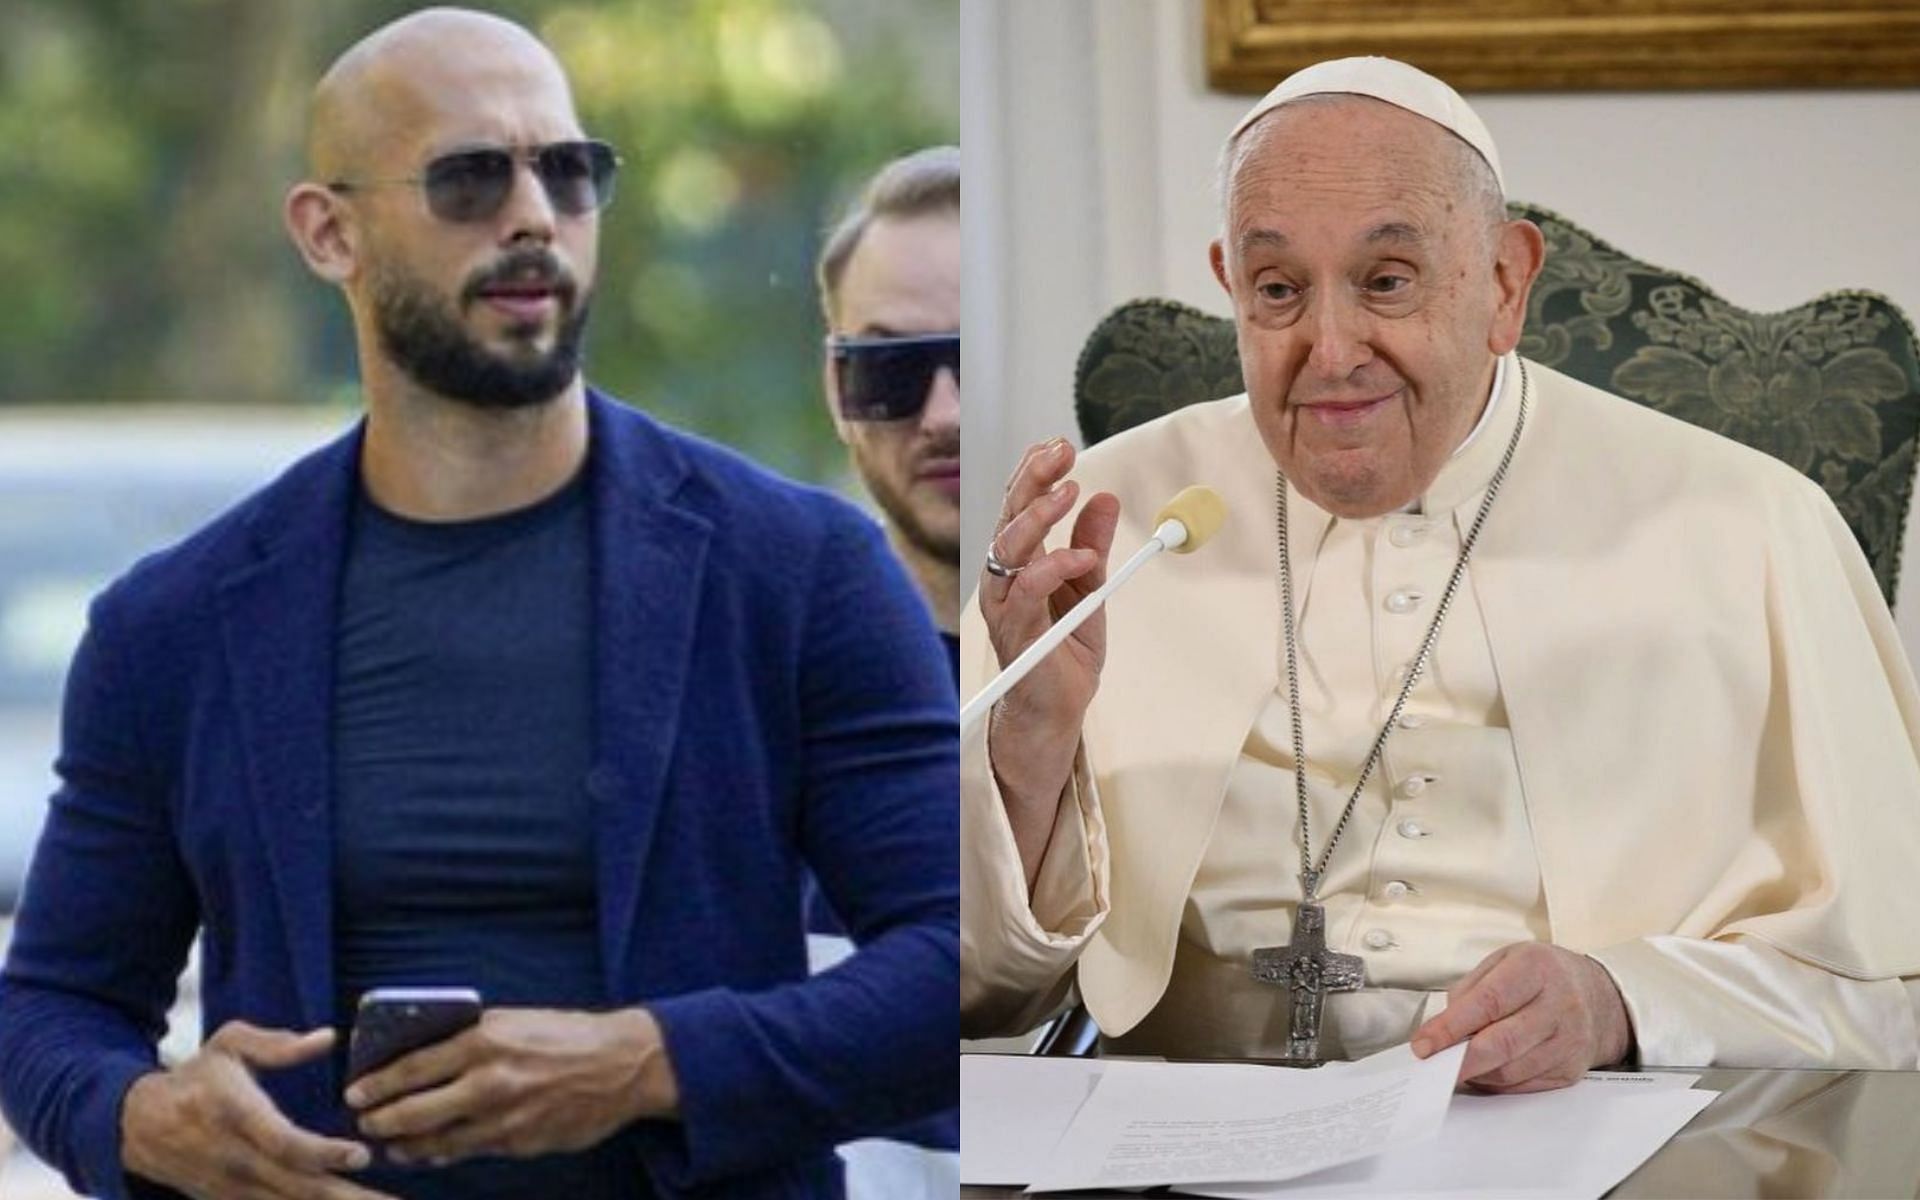 Andrew Tate (left) and Pope Francis (right) (Images courtesy @Cobratate on X and @franciscus on Instagram)